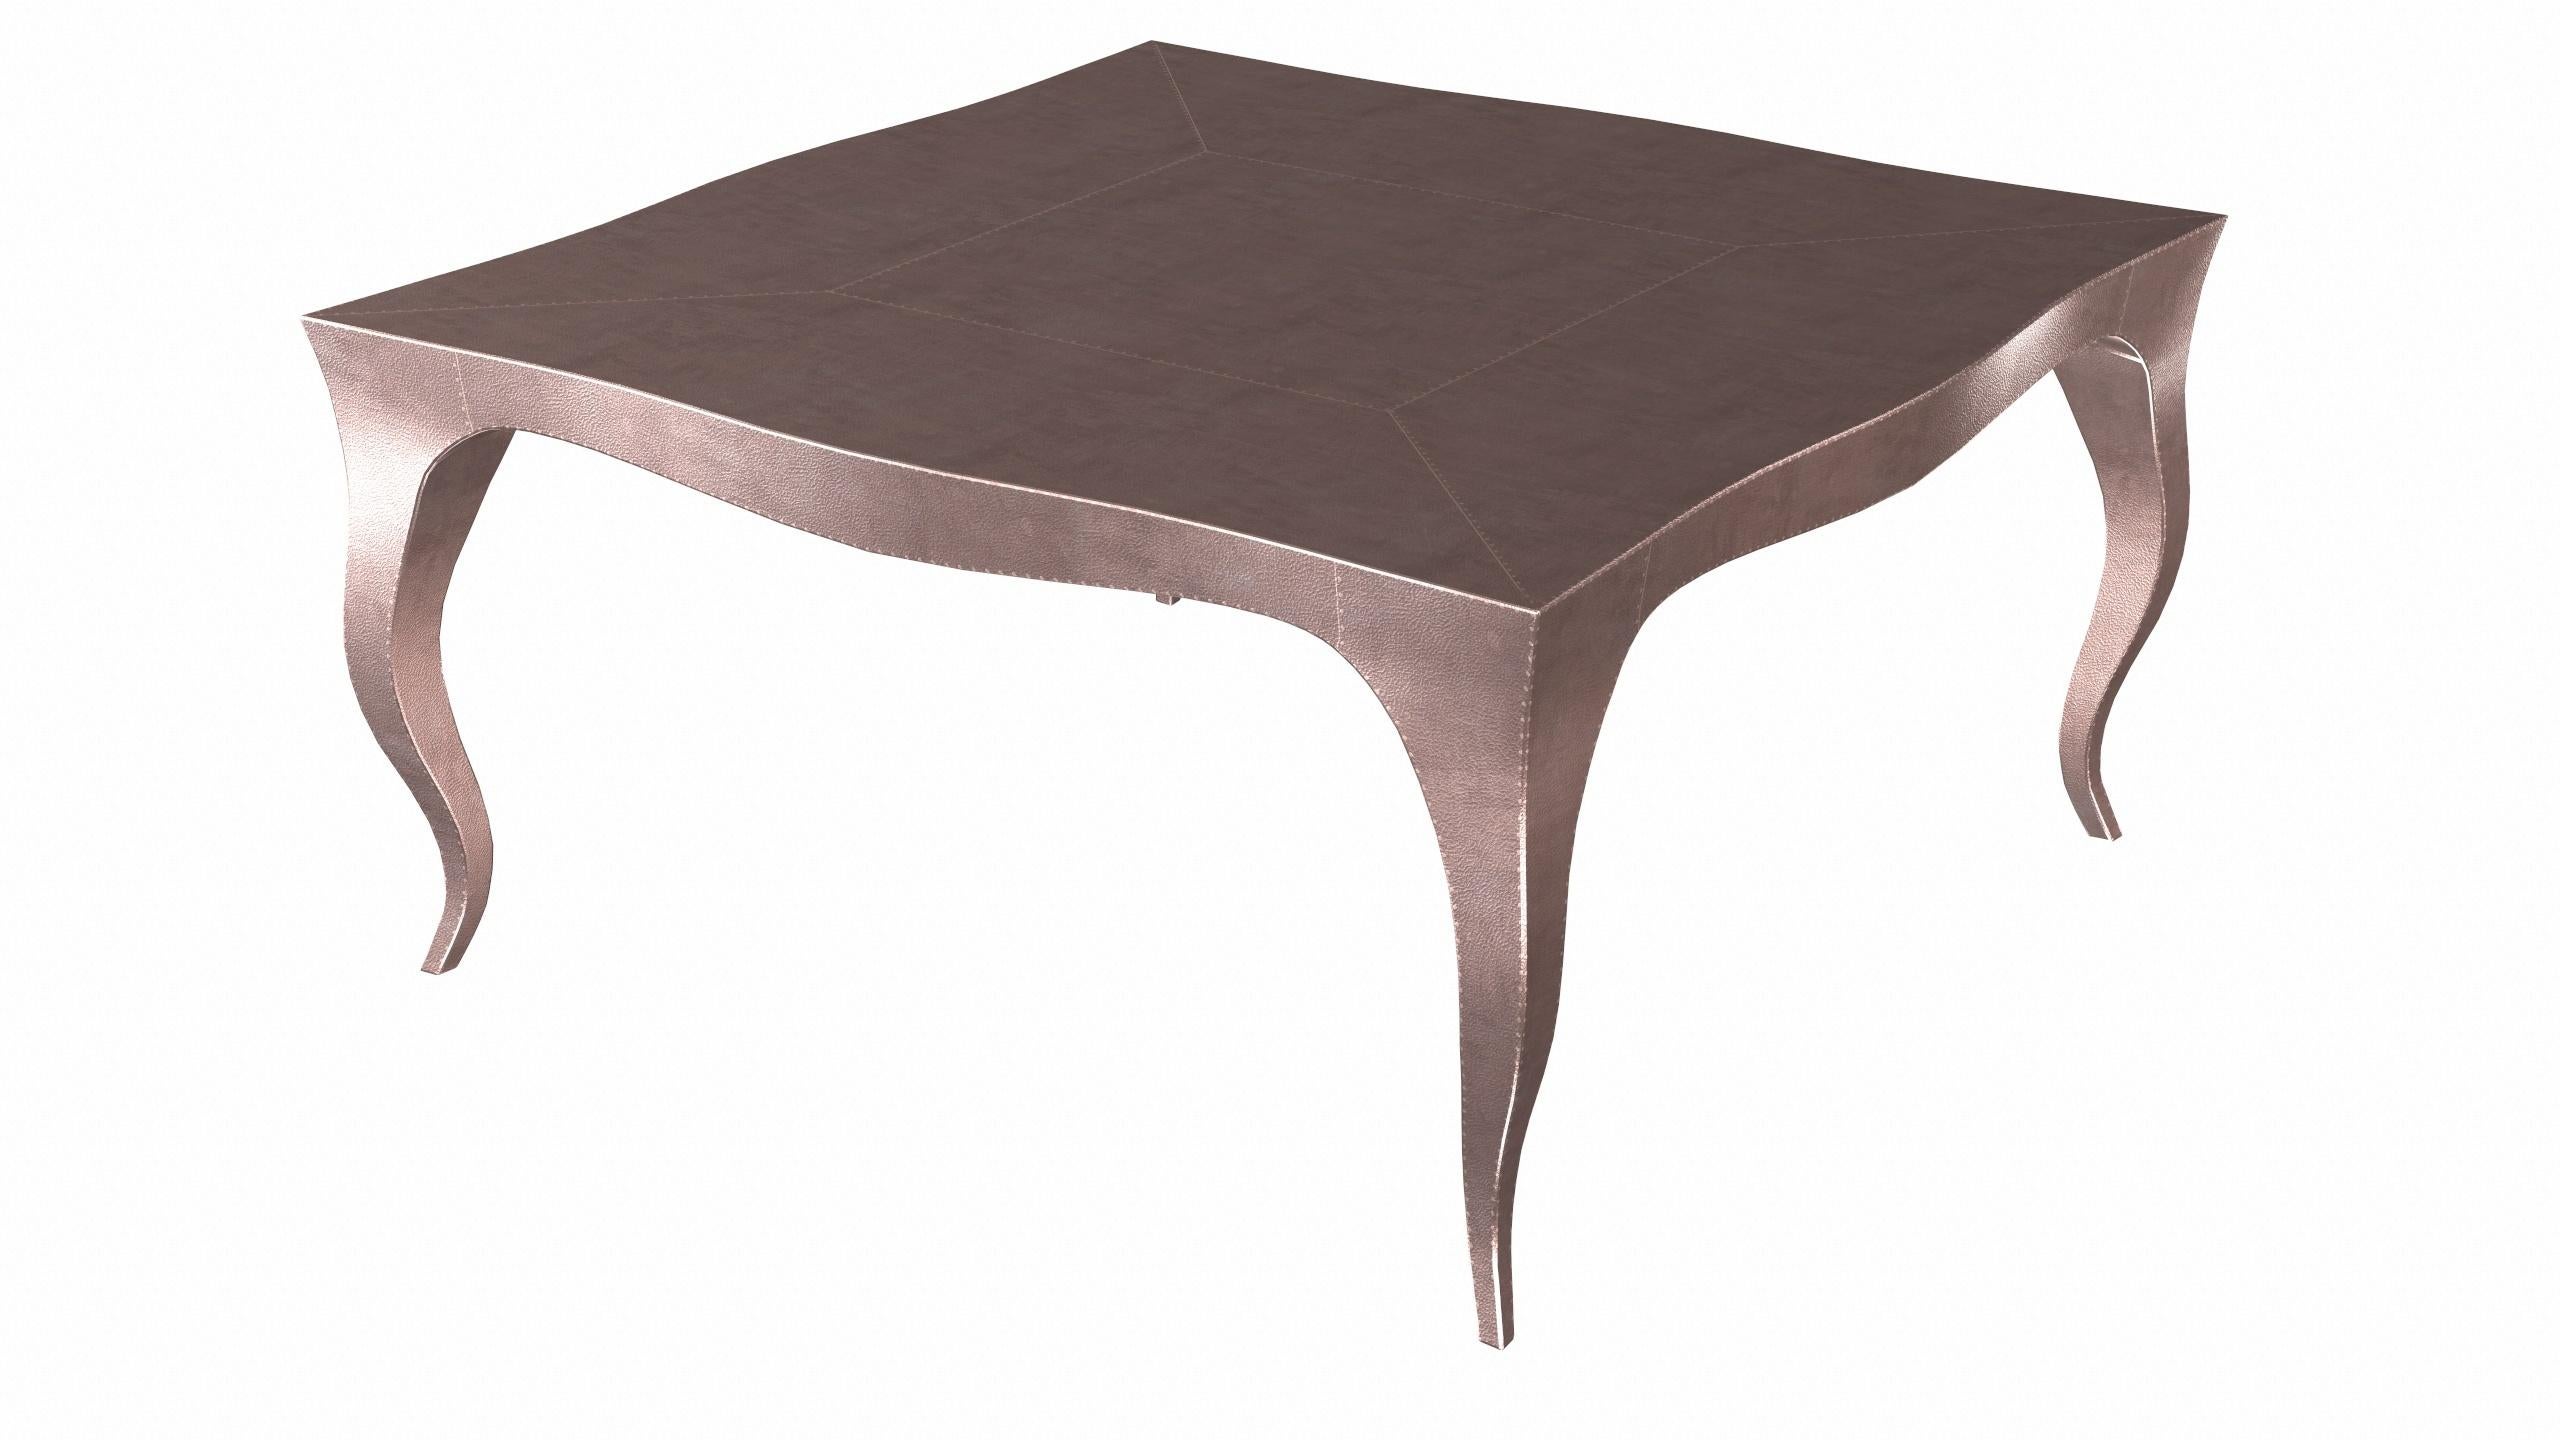 Contemporary Louise Art Deco Nesting Tables Fine Hammered Copper by Paul 18.5x18.5x10 inch  For Sale